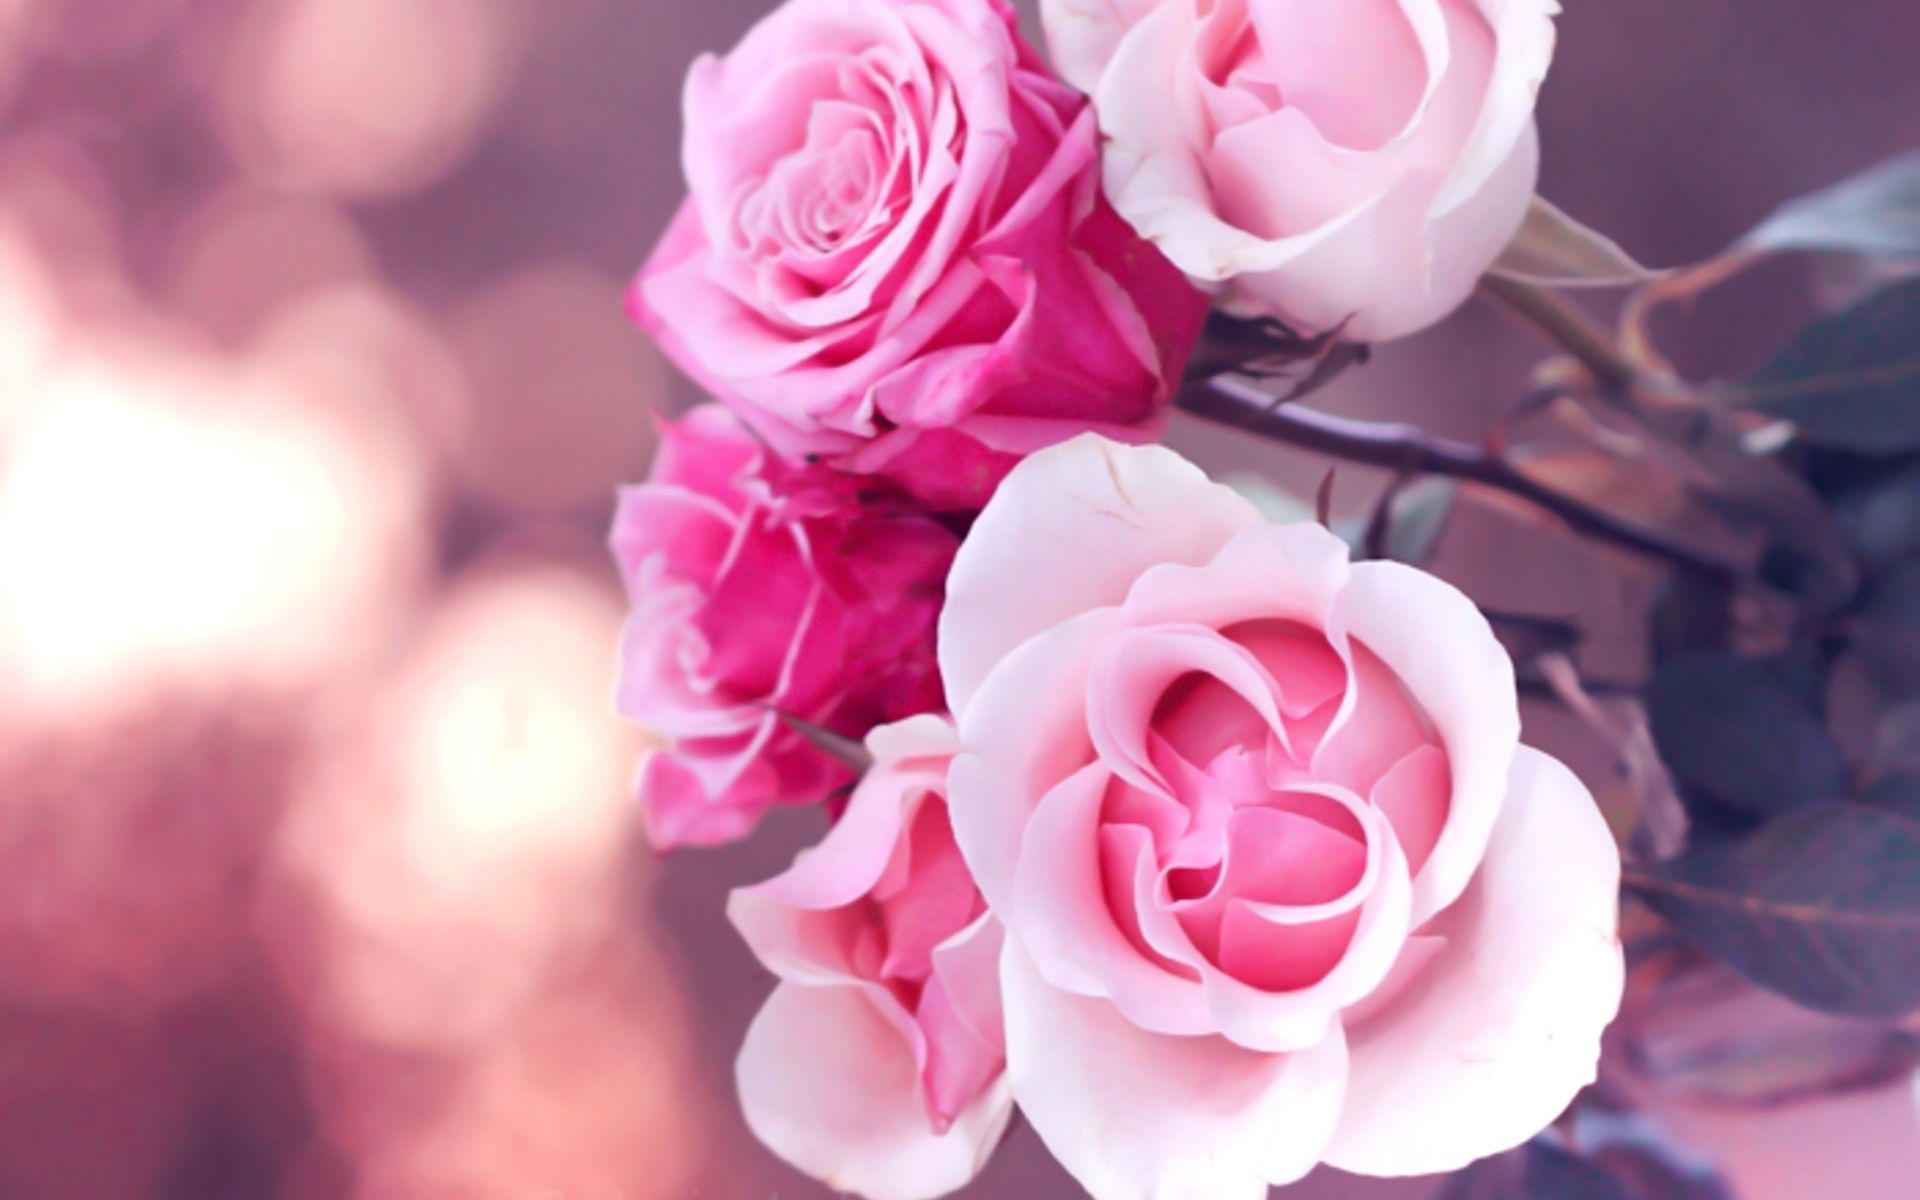 Pink Roses That Spread Happiness And Joy - Picsy Buzz